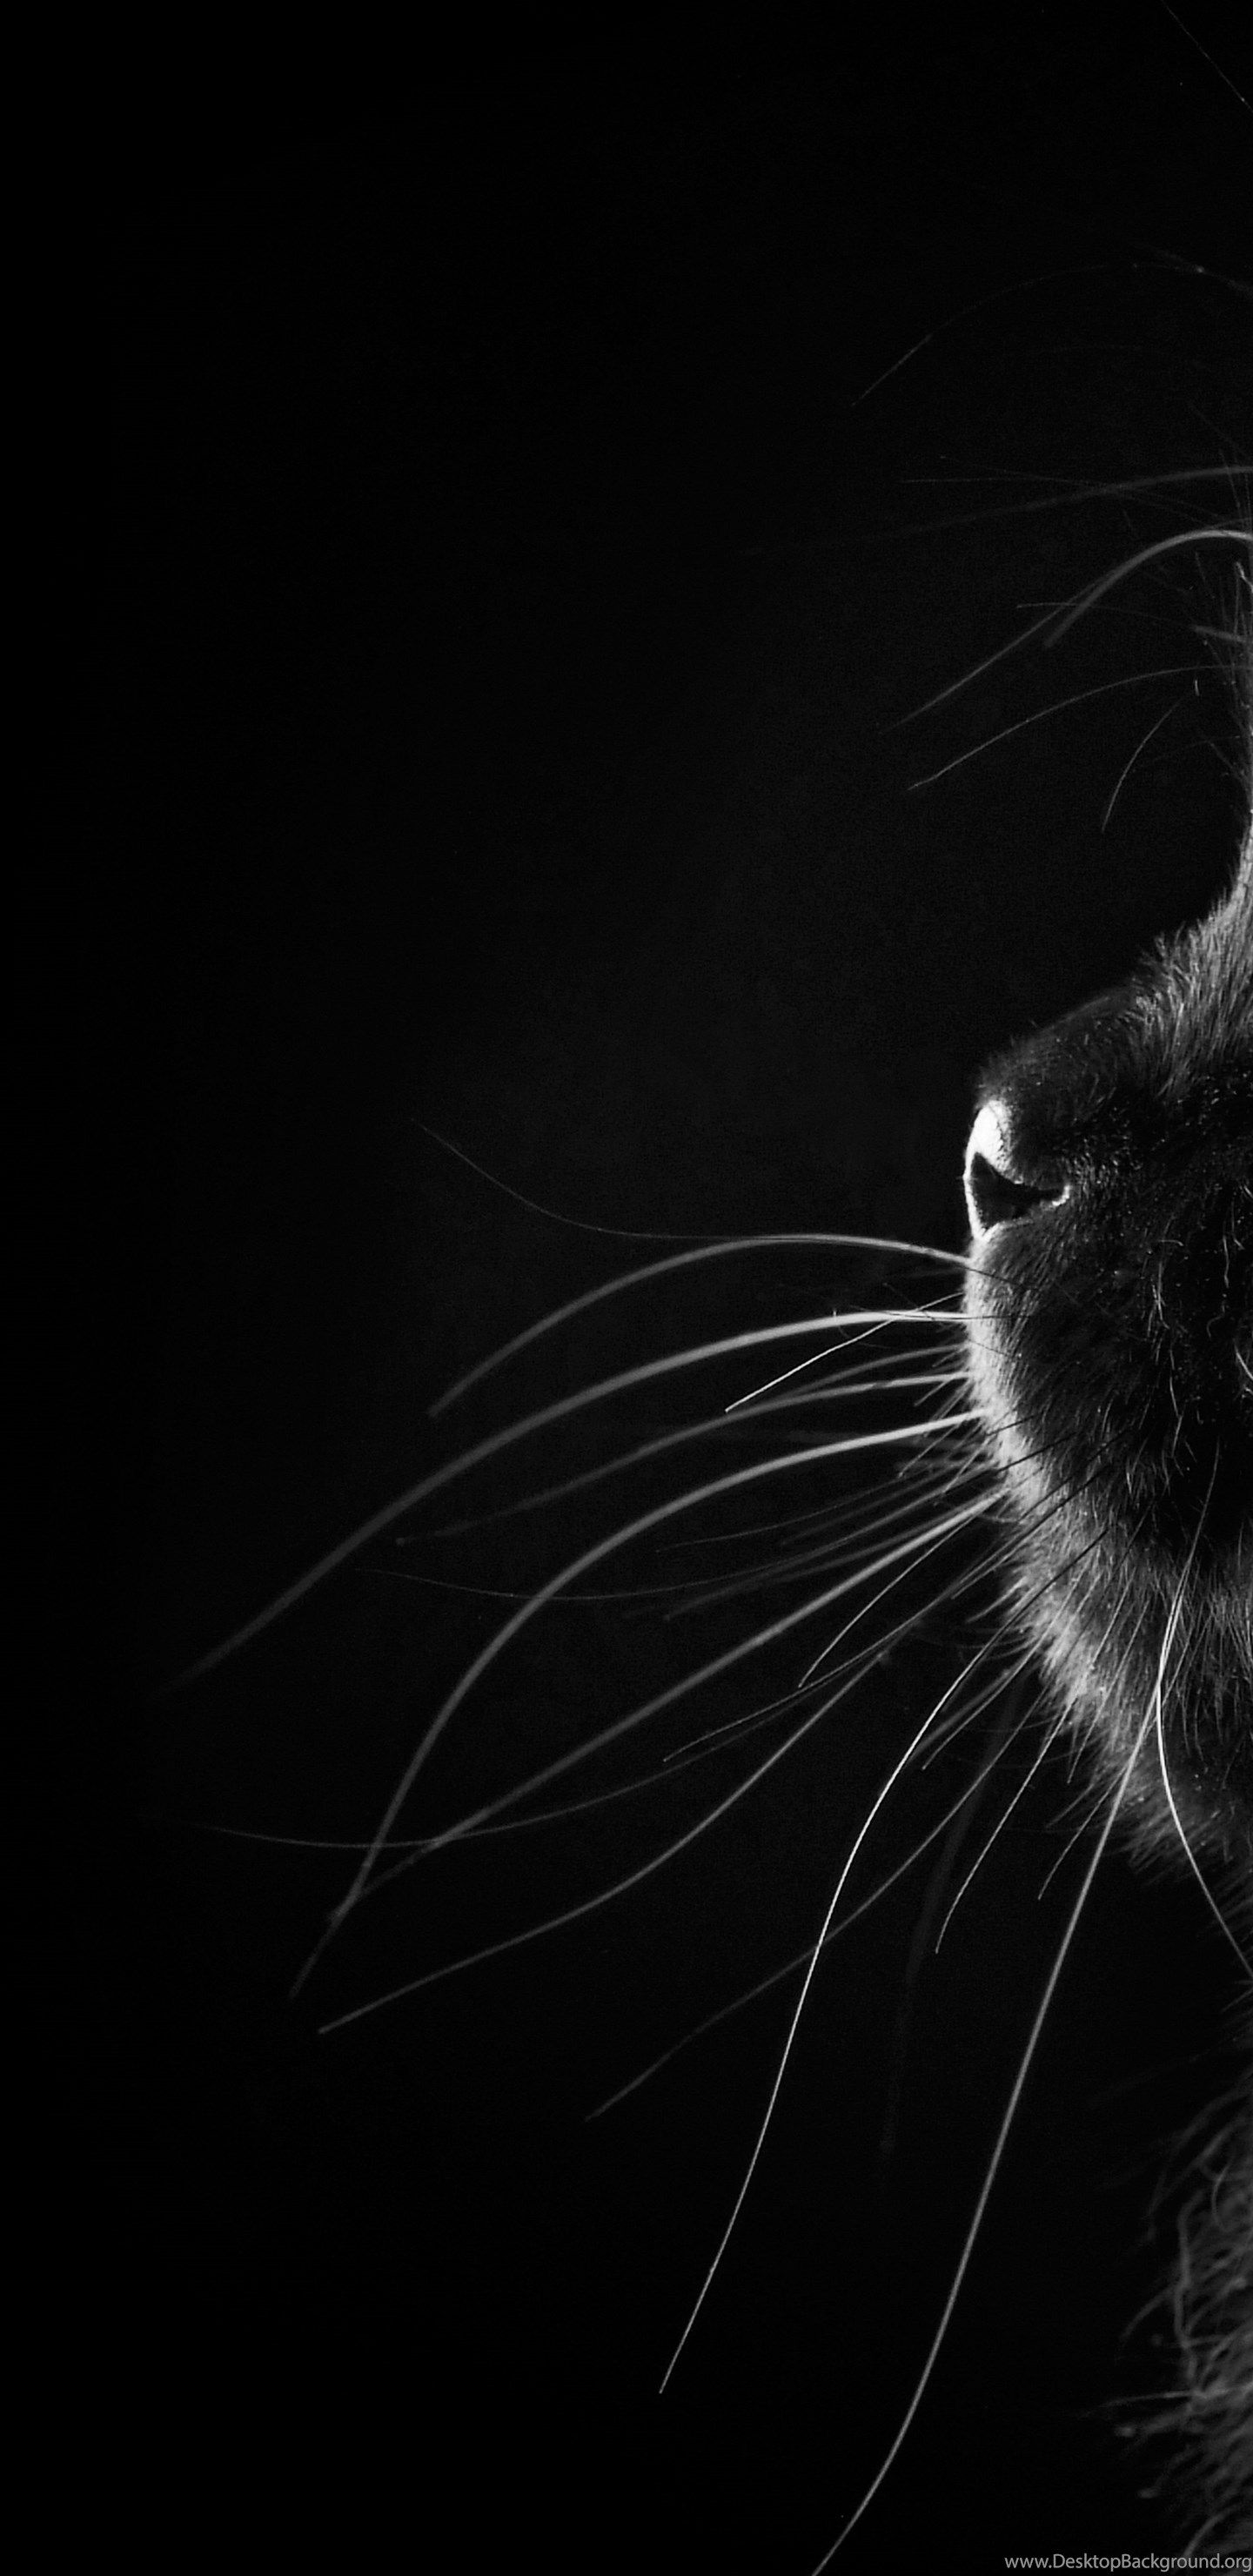 Fluffy Black Cat On A Black Background Wallpaper And Image